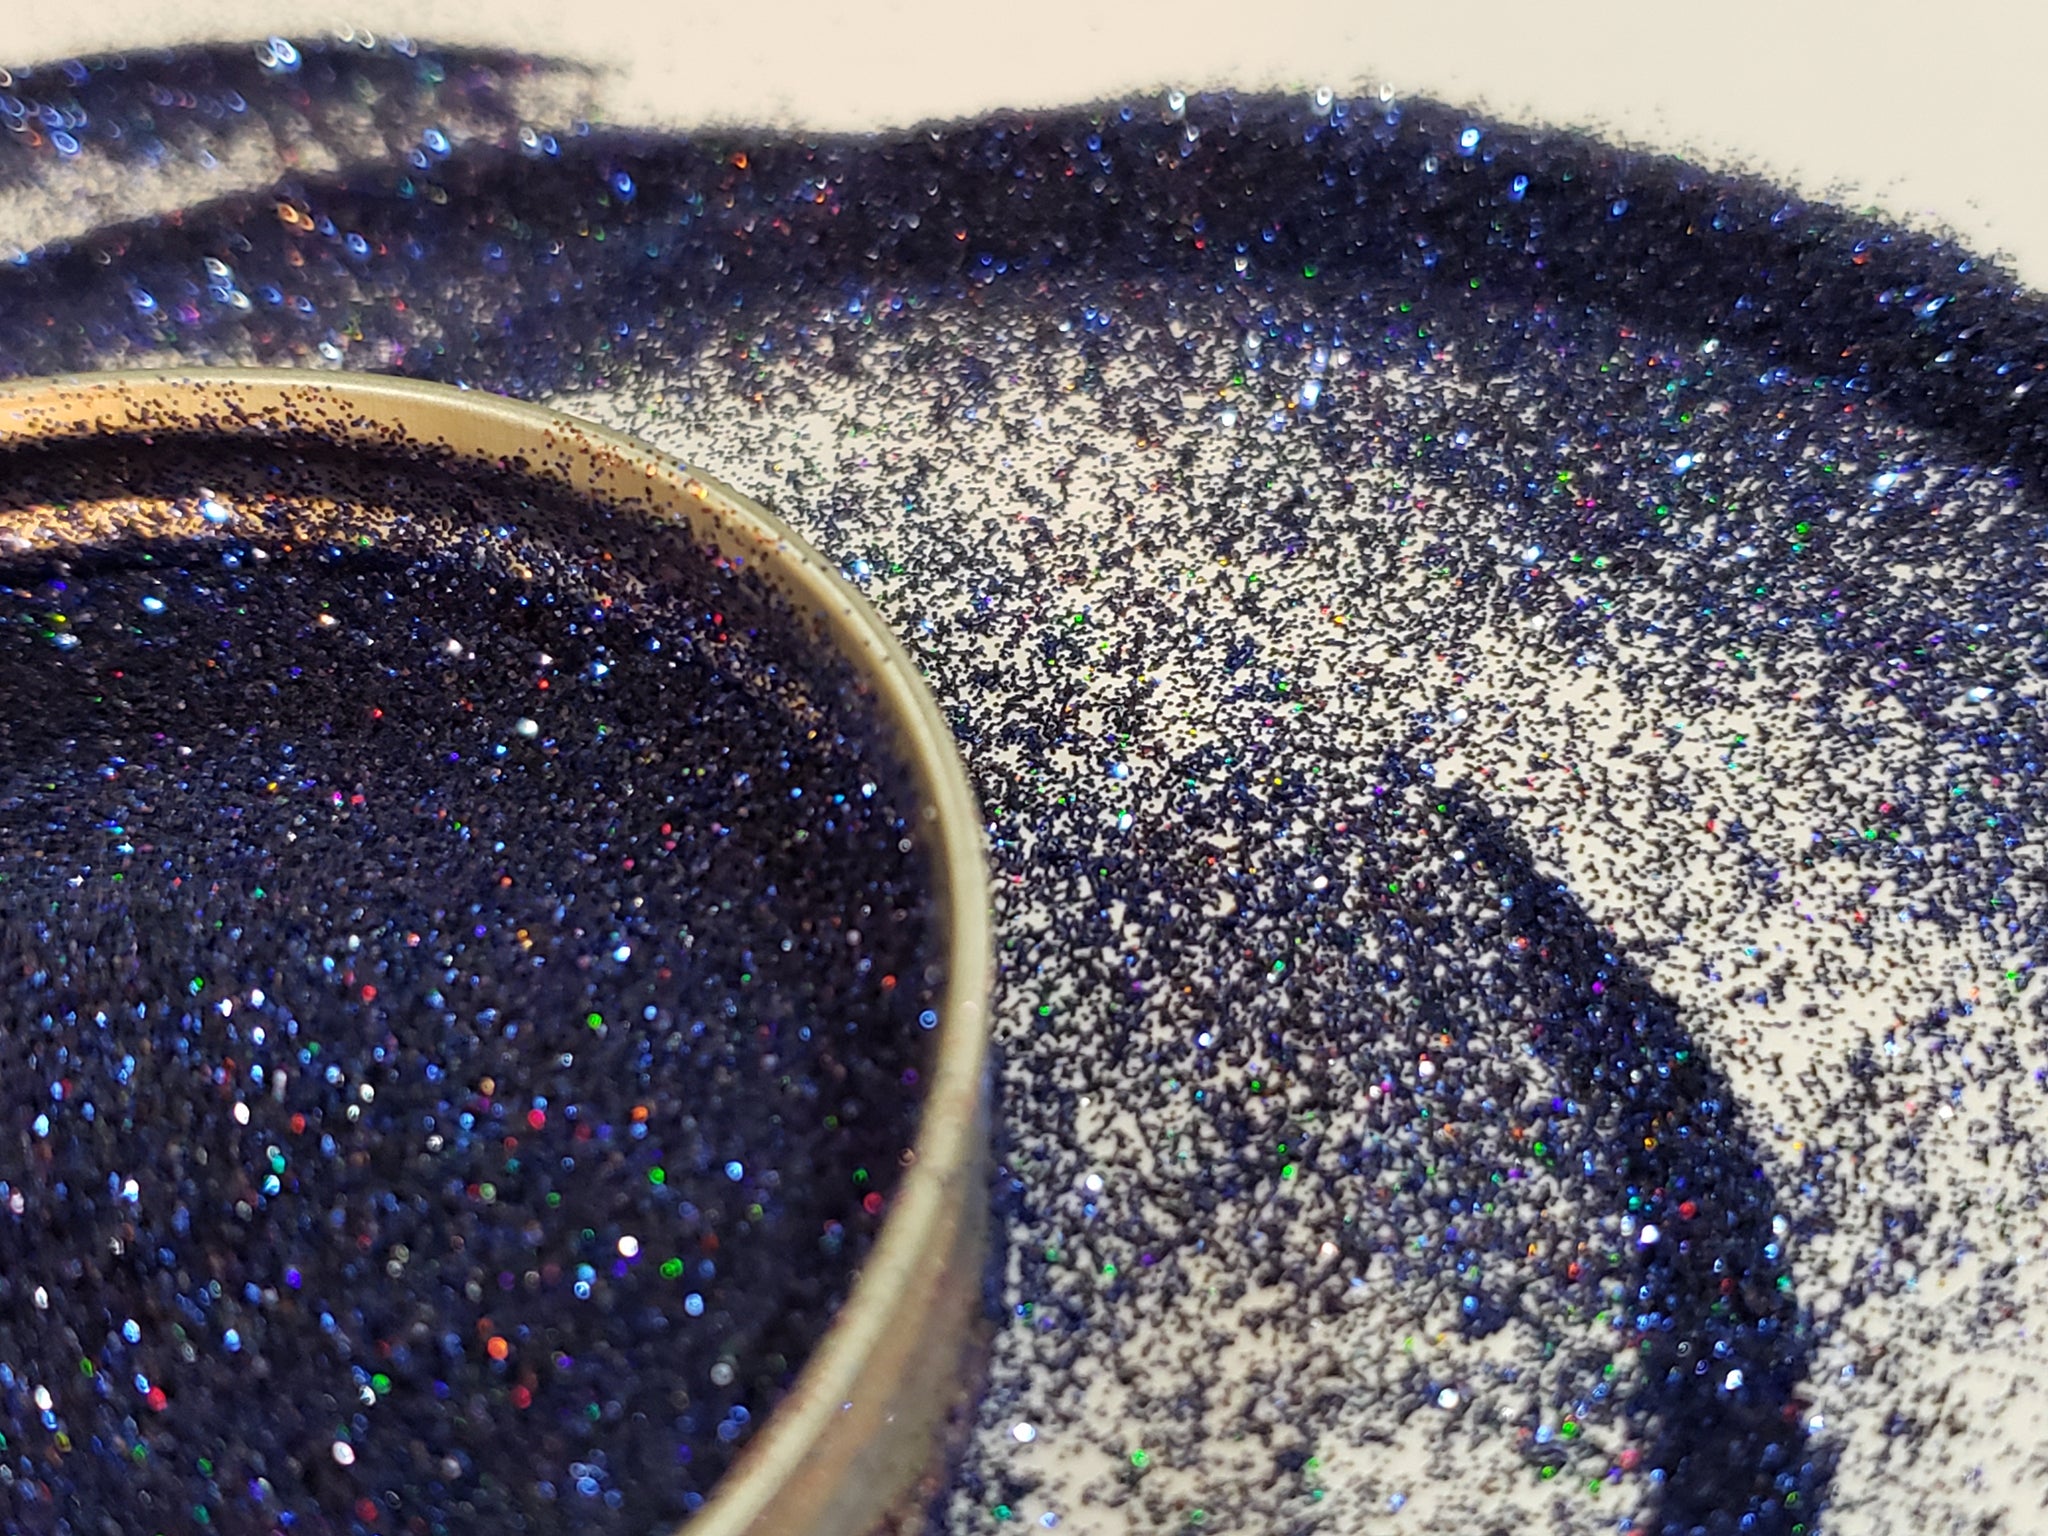 Shop our Illusions Extra Fine Glitter 0.2mm-Neon Green (56g) Illusions to  get the authentic deal